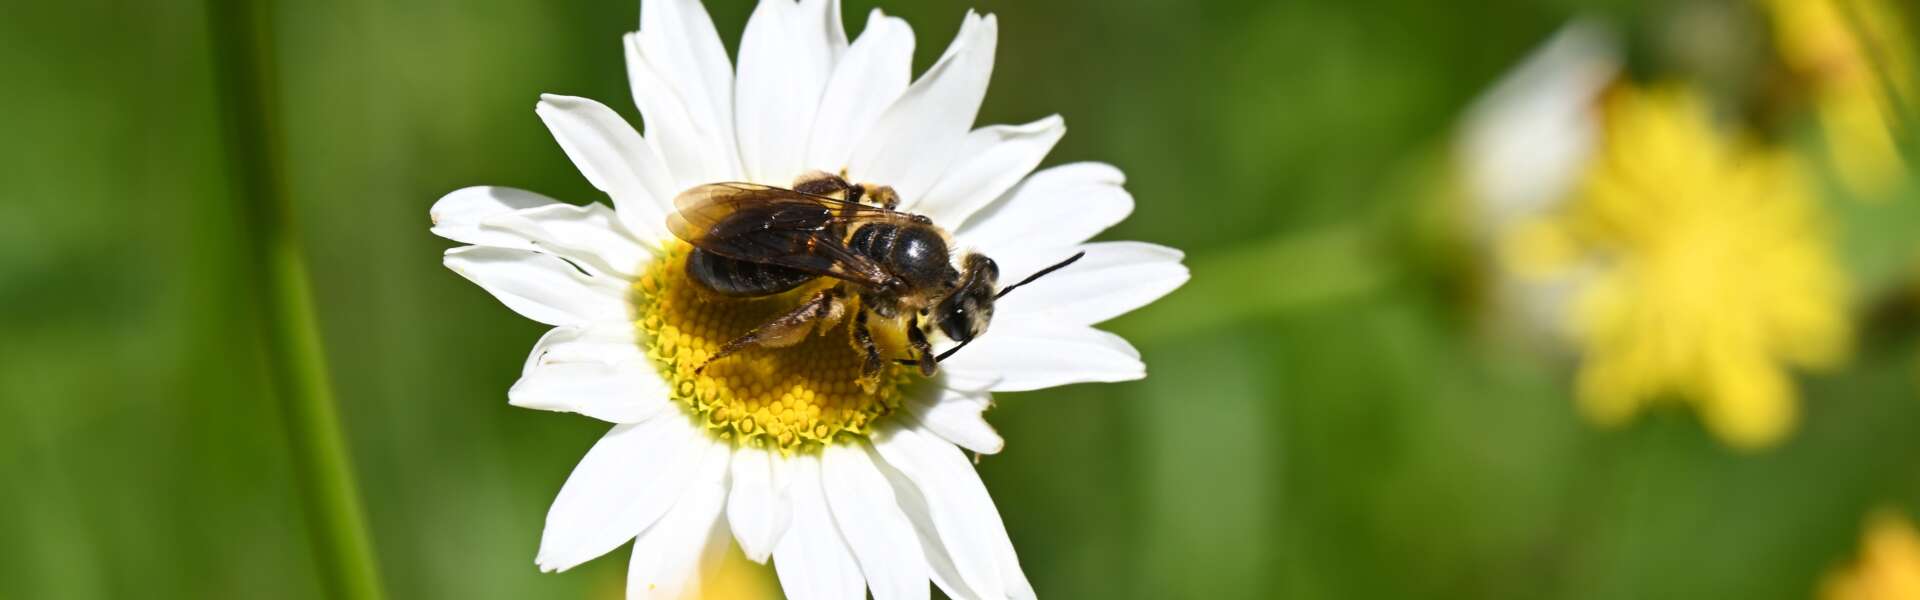 A wild bee gathers pollen from a daisy